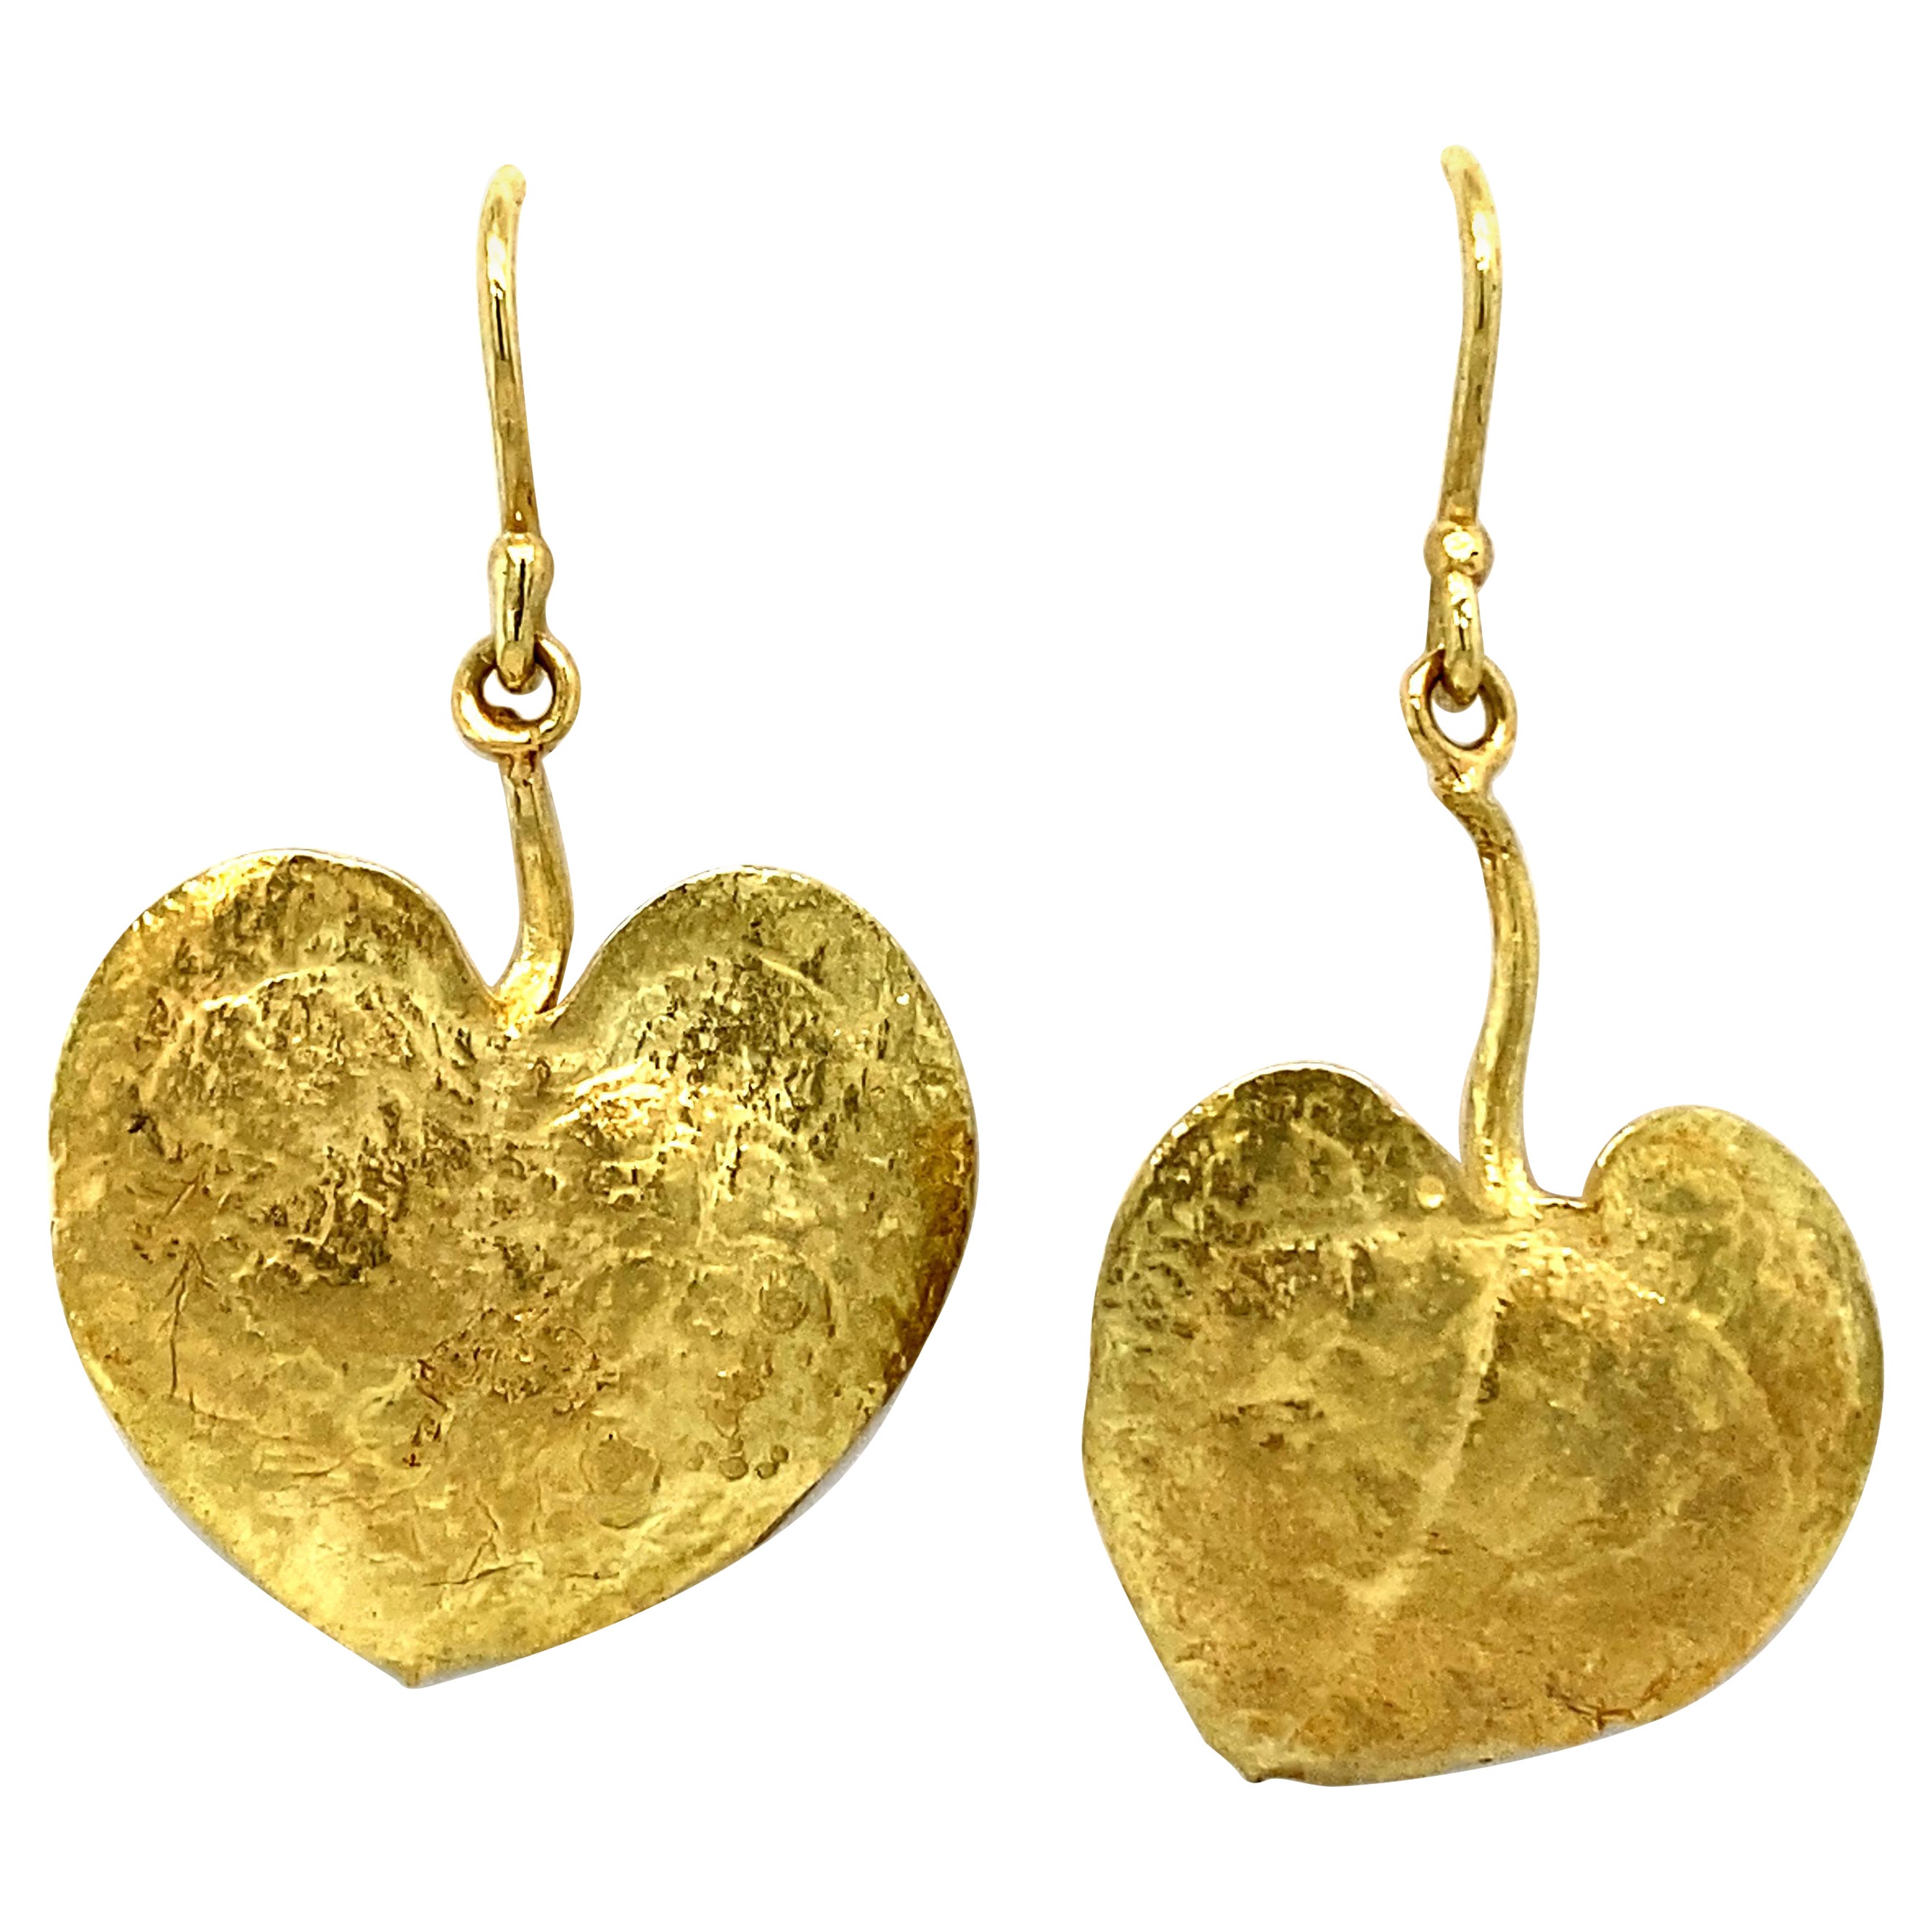 Perfectly Mismatched Leaf Dangle Earrings in 18 Karat Gold by Eytan Brandes